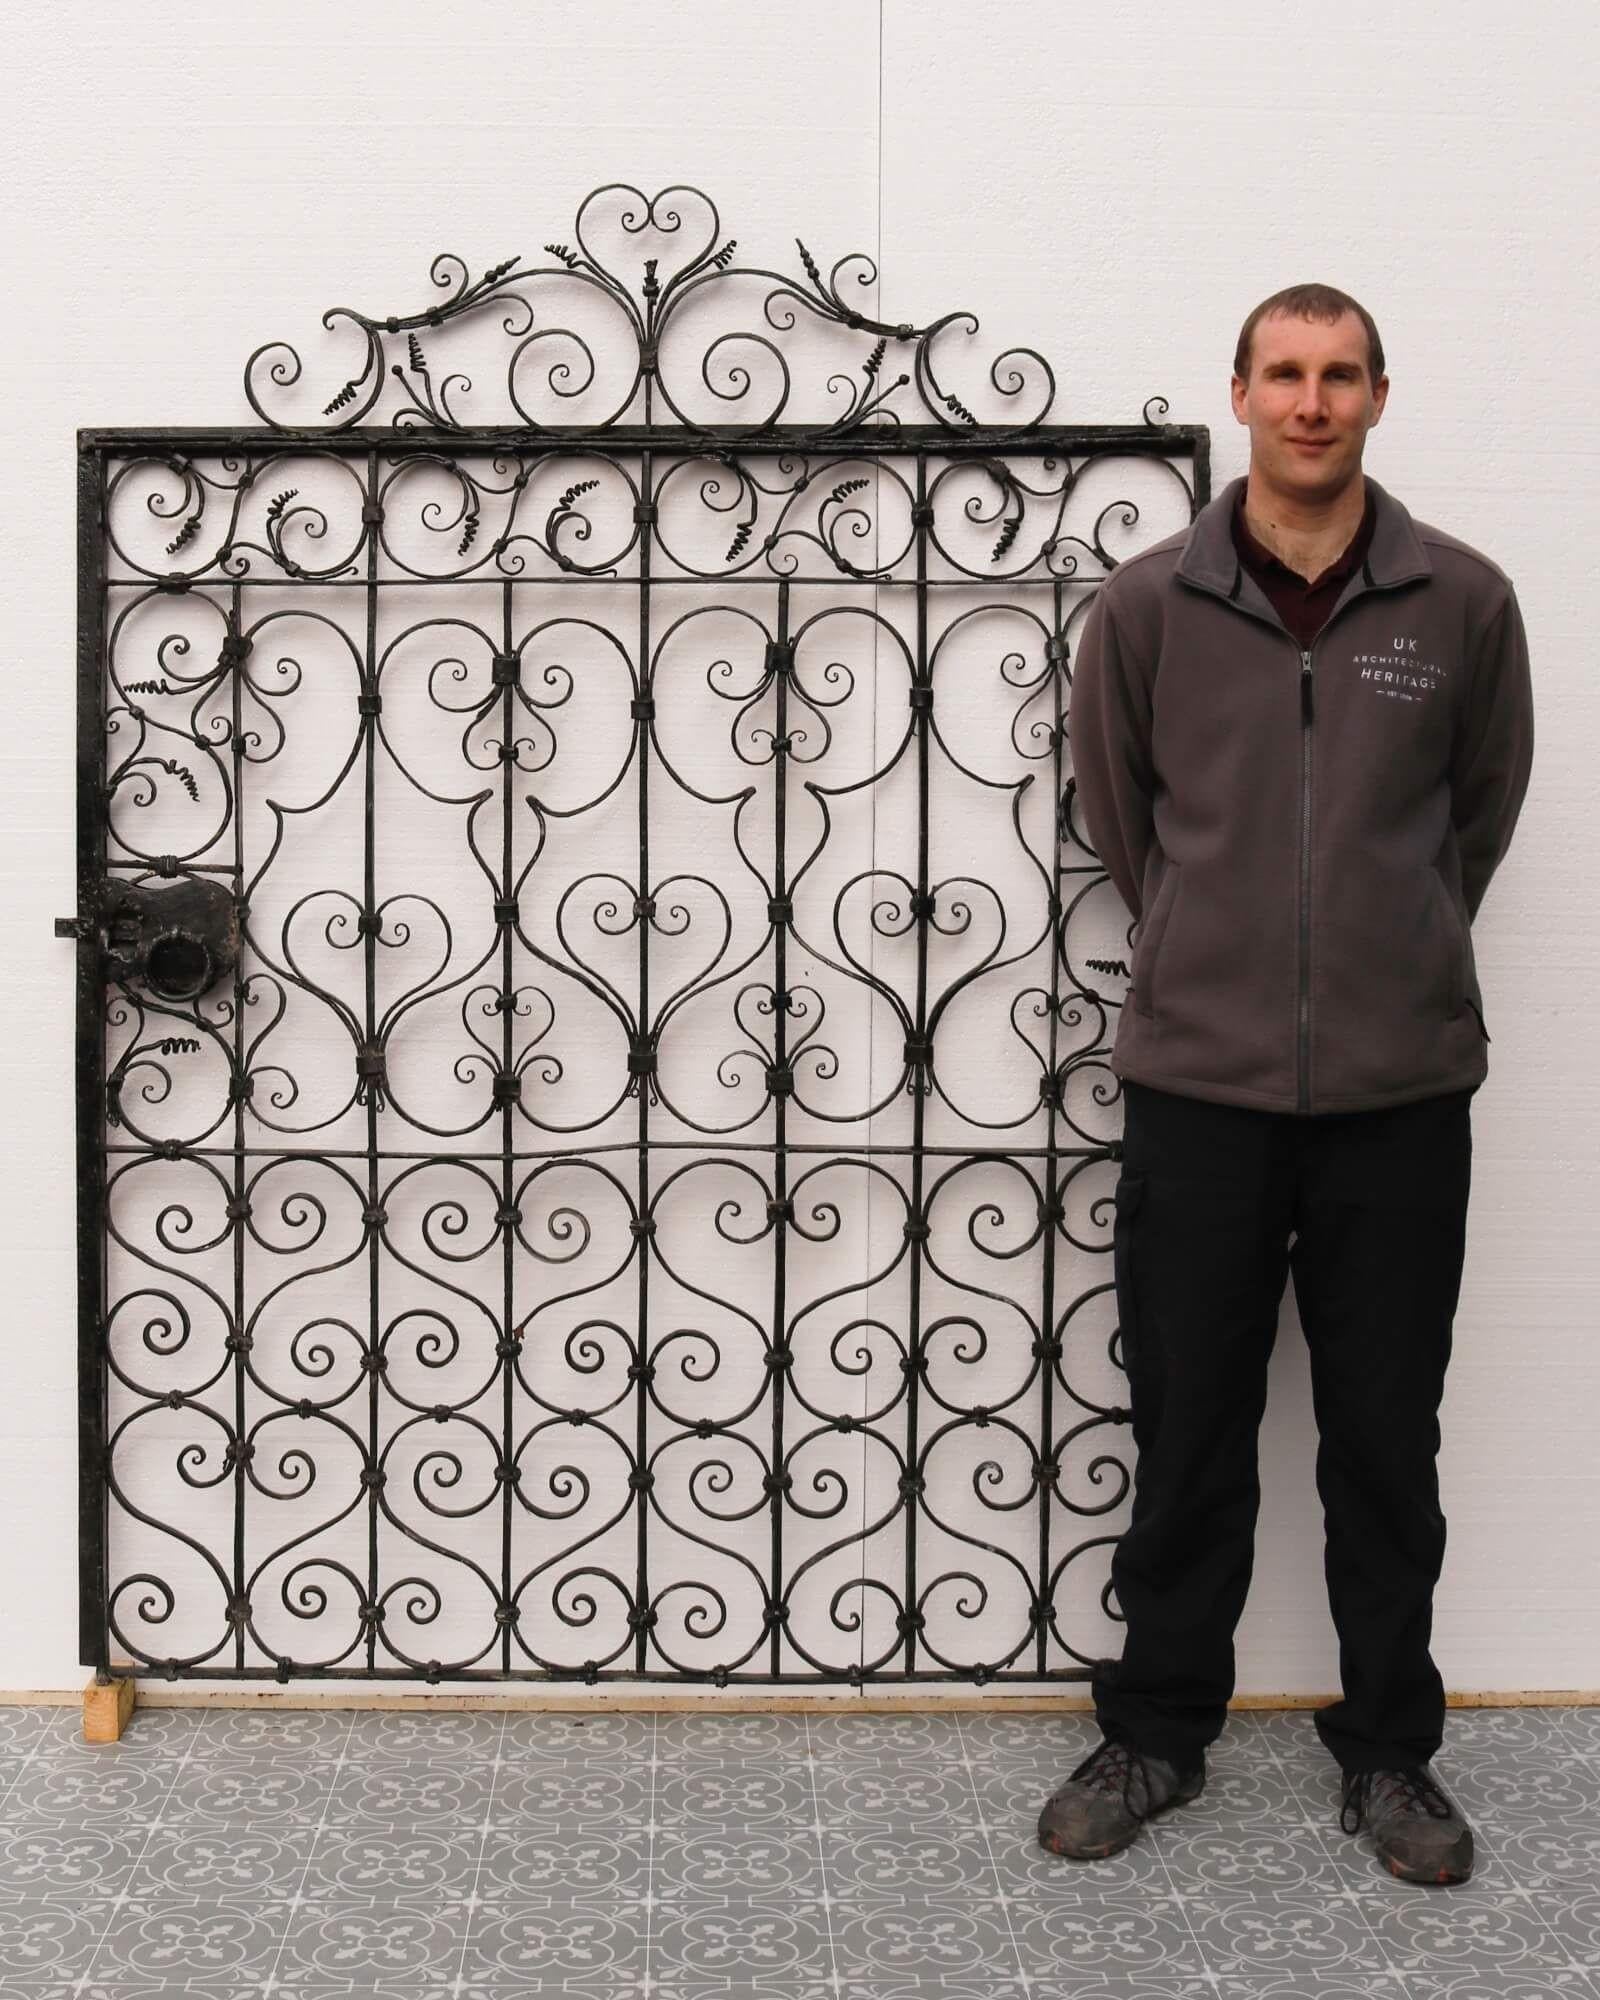 This large antique wrought iron pedestrian gate is a superb addition to any garden with its handsome scrollwork and impressive scale. Circa 1850, this wide garden side gate is over 170 years old and has stood the test of time, the elaborate